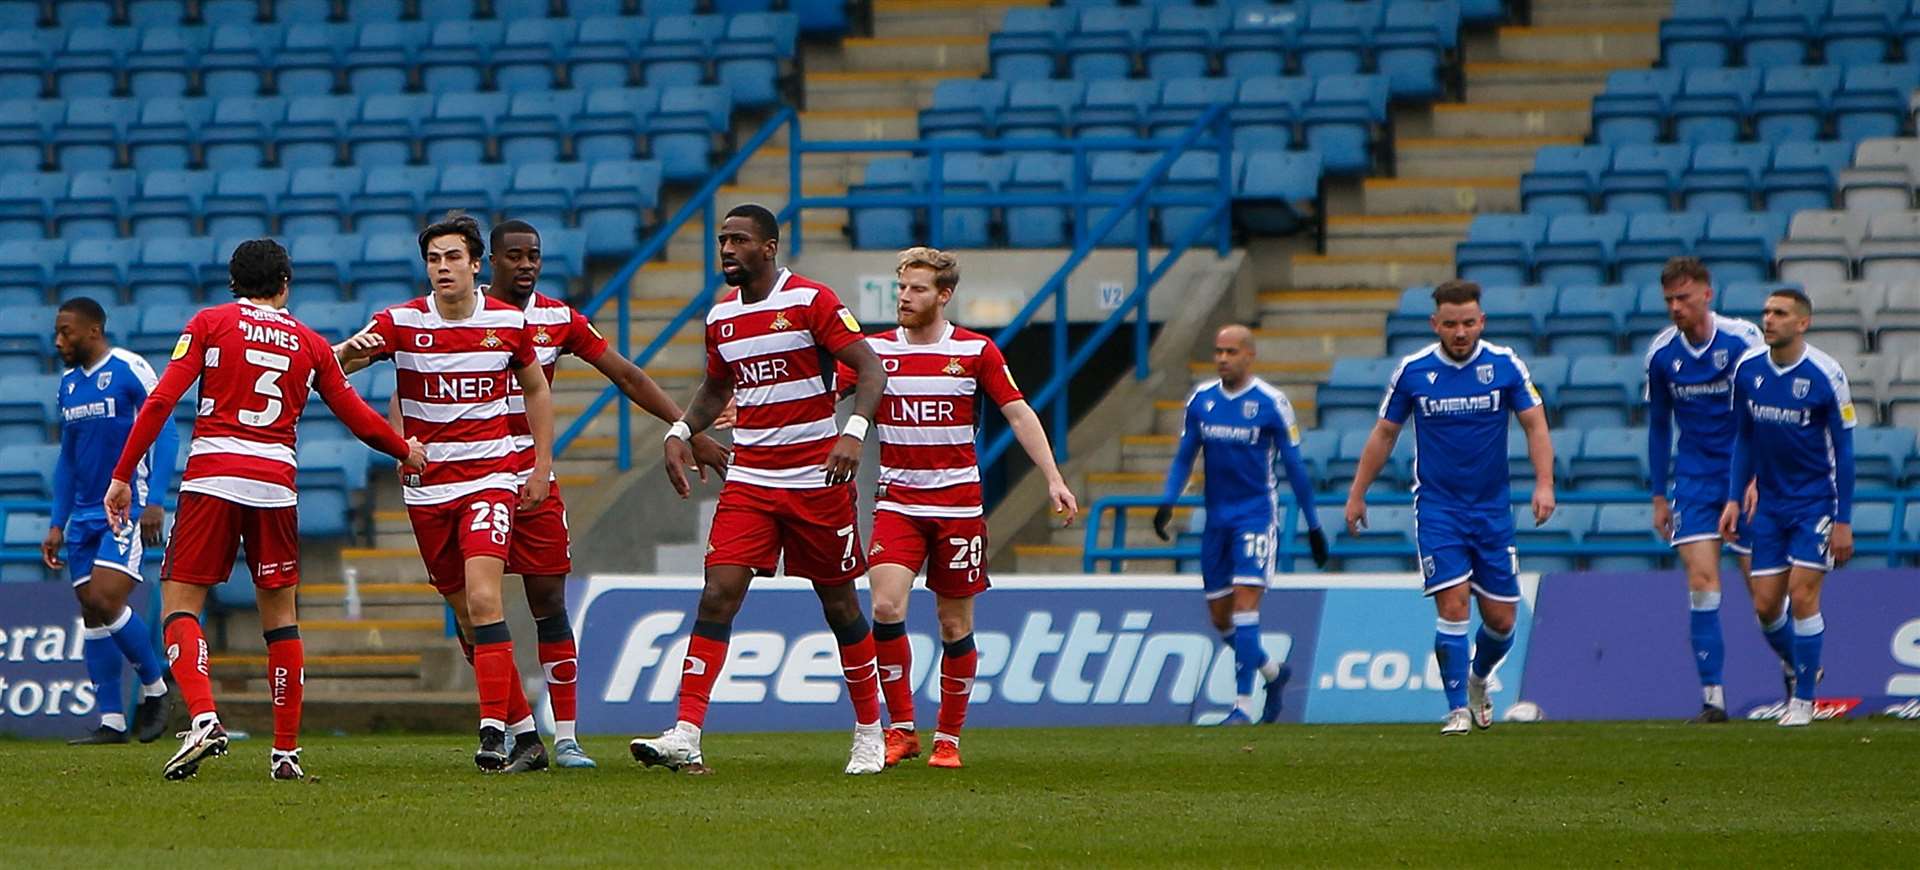 Contrasting emotions between the two teams as Doncaster make it 2-2 at Gillingham on Saturday. Picture: Andy Jones (45336095)